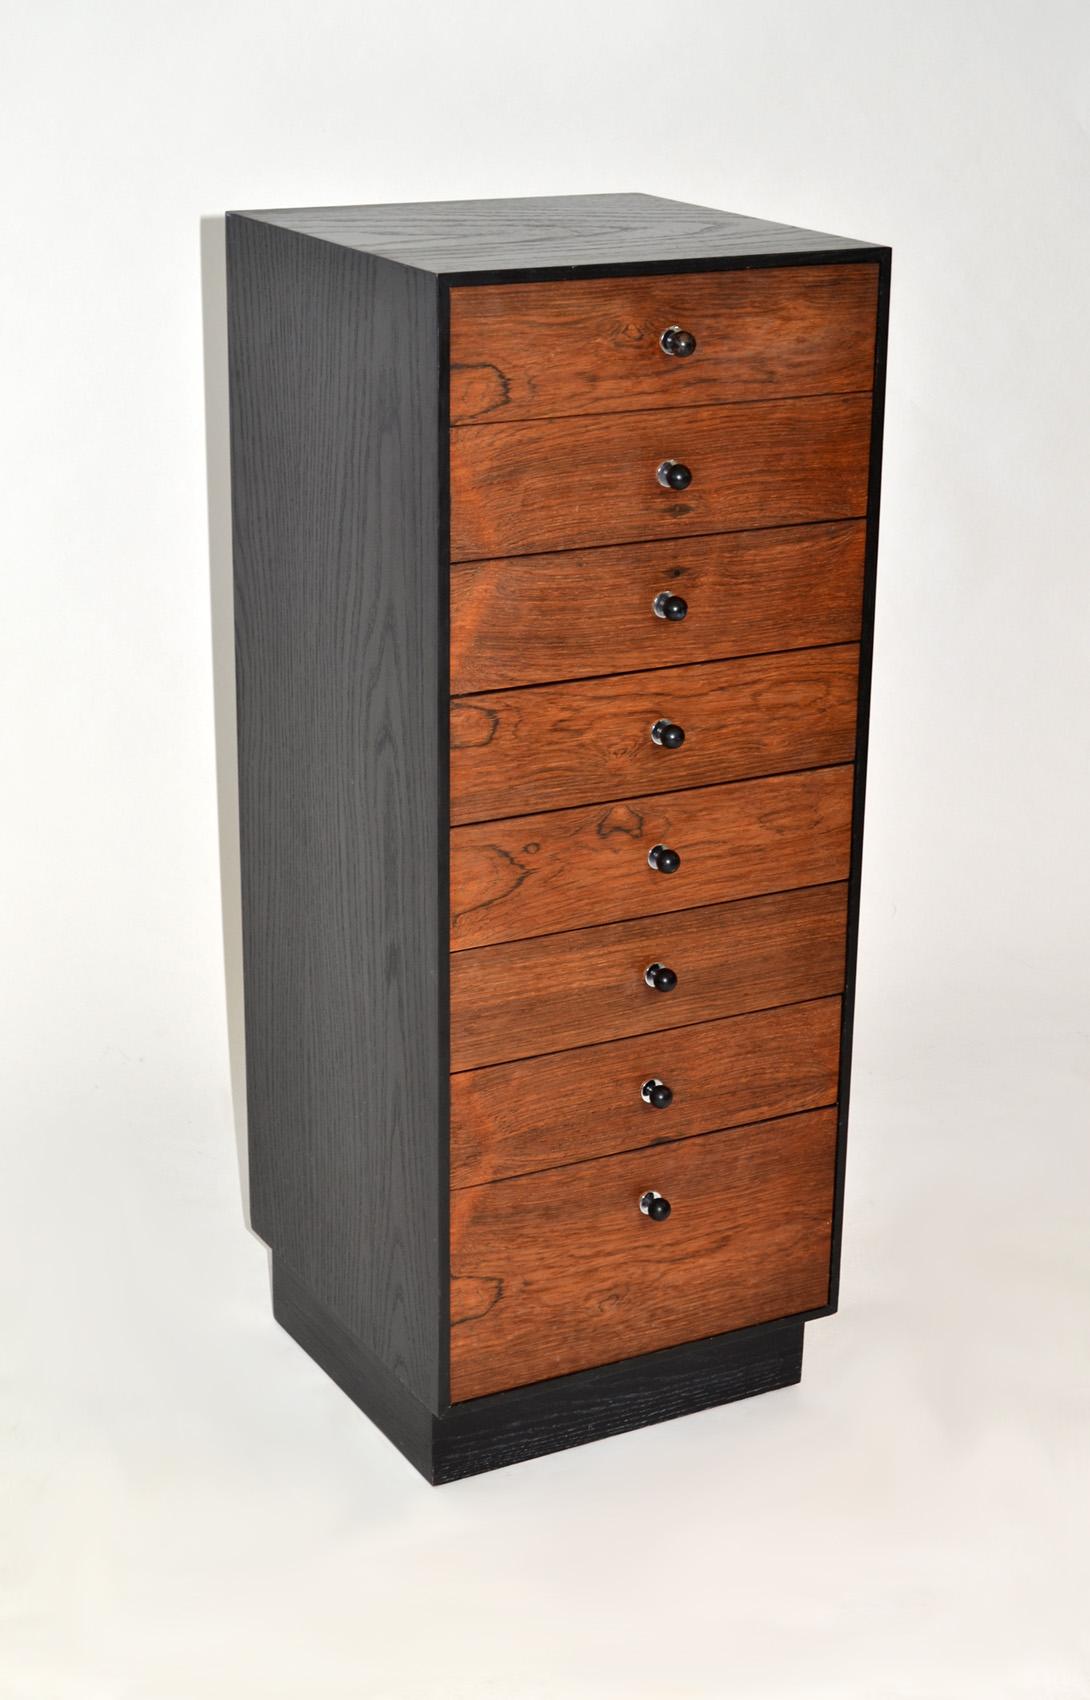 Eight drawer chest of drawers or jewelry chest in rosewood by Harvey Probber.

Jewelry, lingerie, silver or chest or drawers with eight drawers, rosewood fronts, ebonized oak sides and back with chrome plated metal, and black enameled metal pulls.